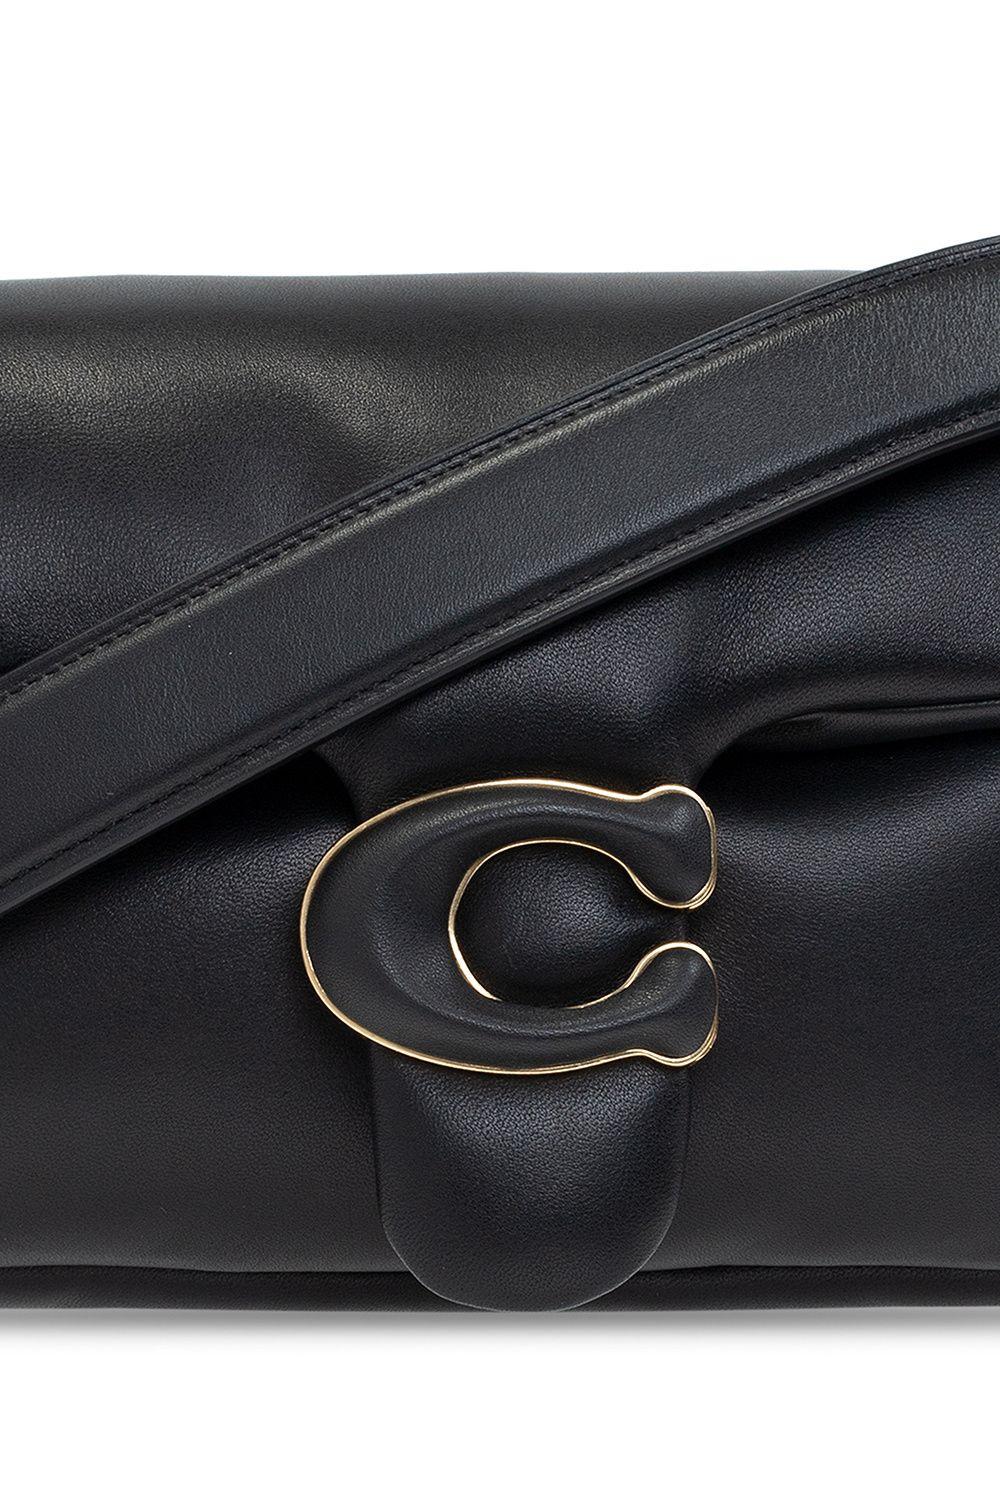 Pillow tabby leather crossbody bag Coach Black in Leather - 36189893